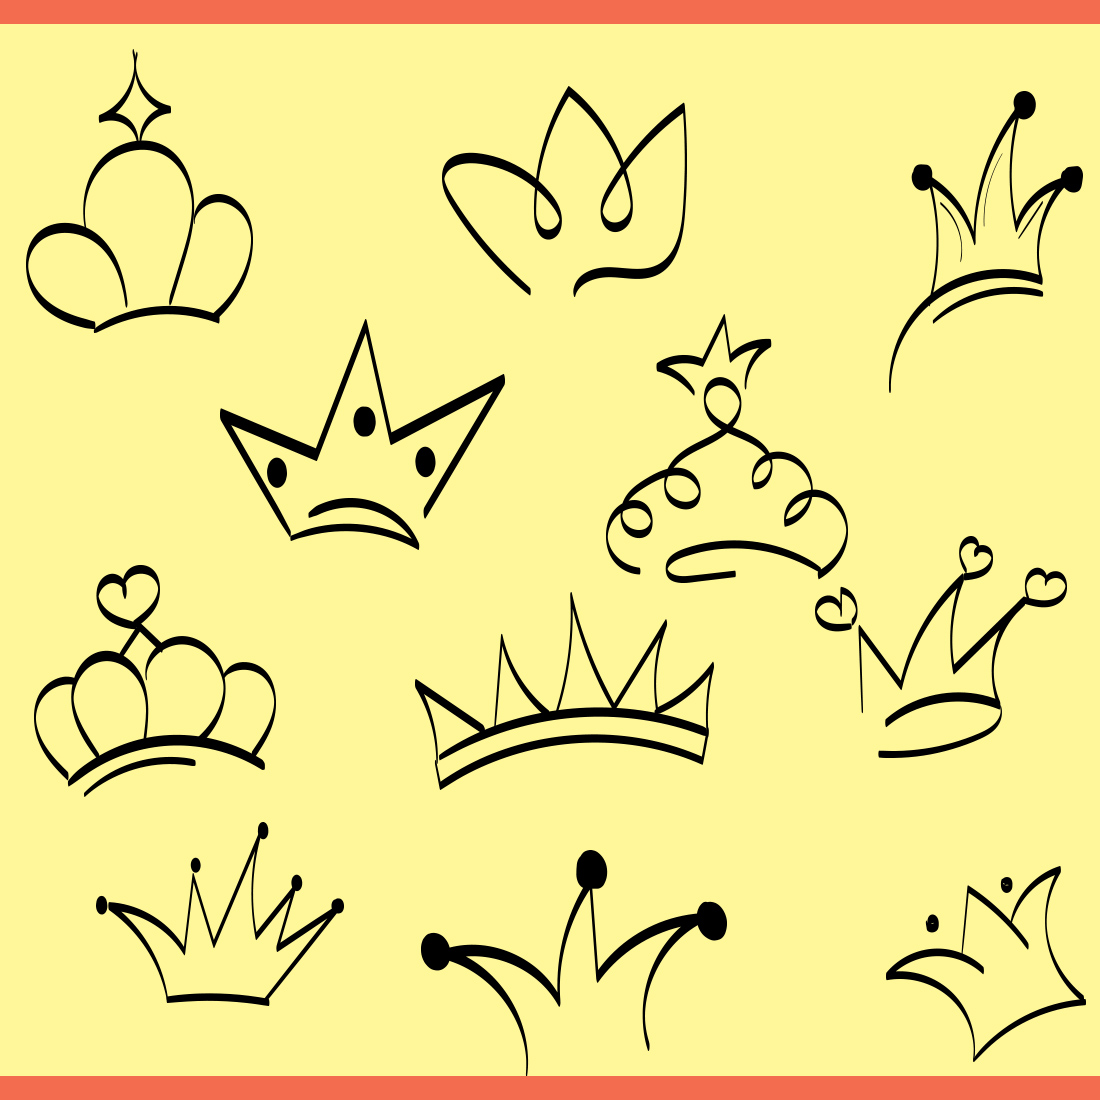 11 Hand Drawn Doodle Crowns - Only $5 preview image.